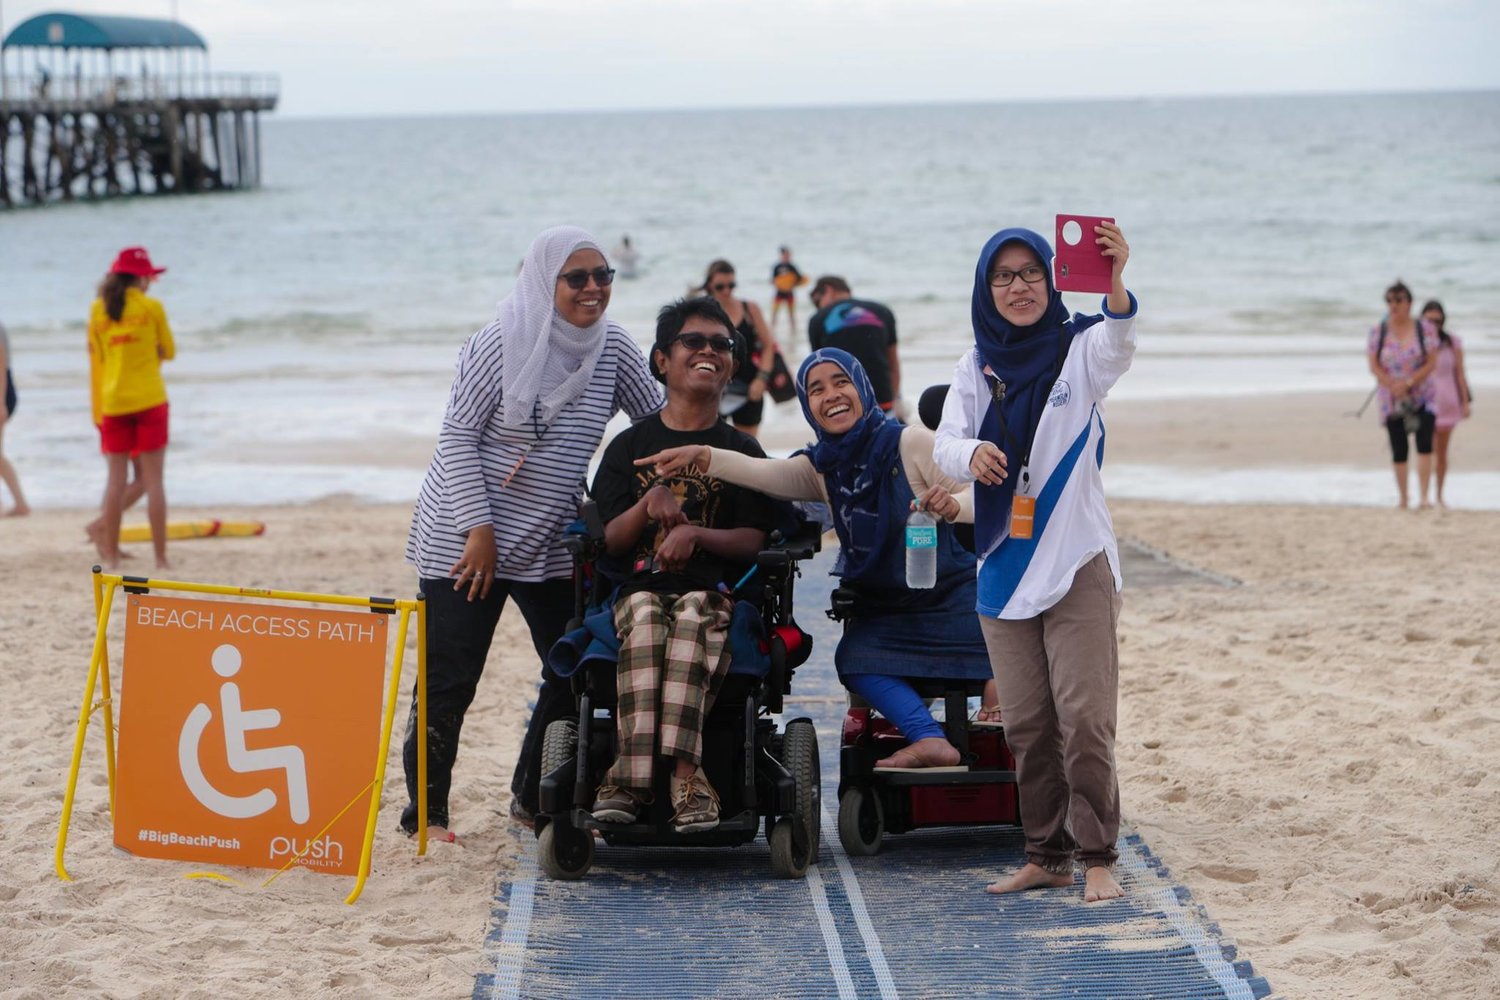 People making use of a beach mat, which allows wheelchair users to move freely across the sand.